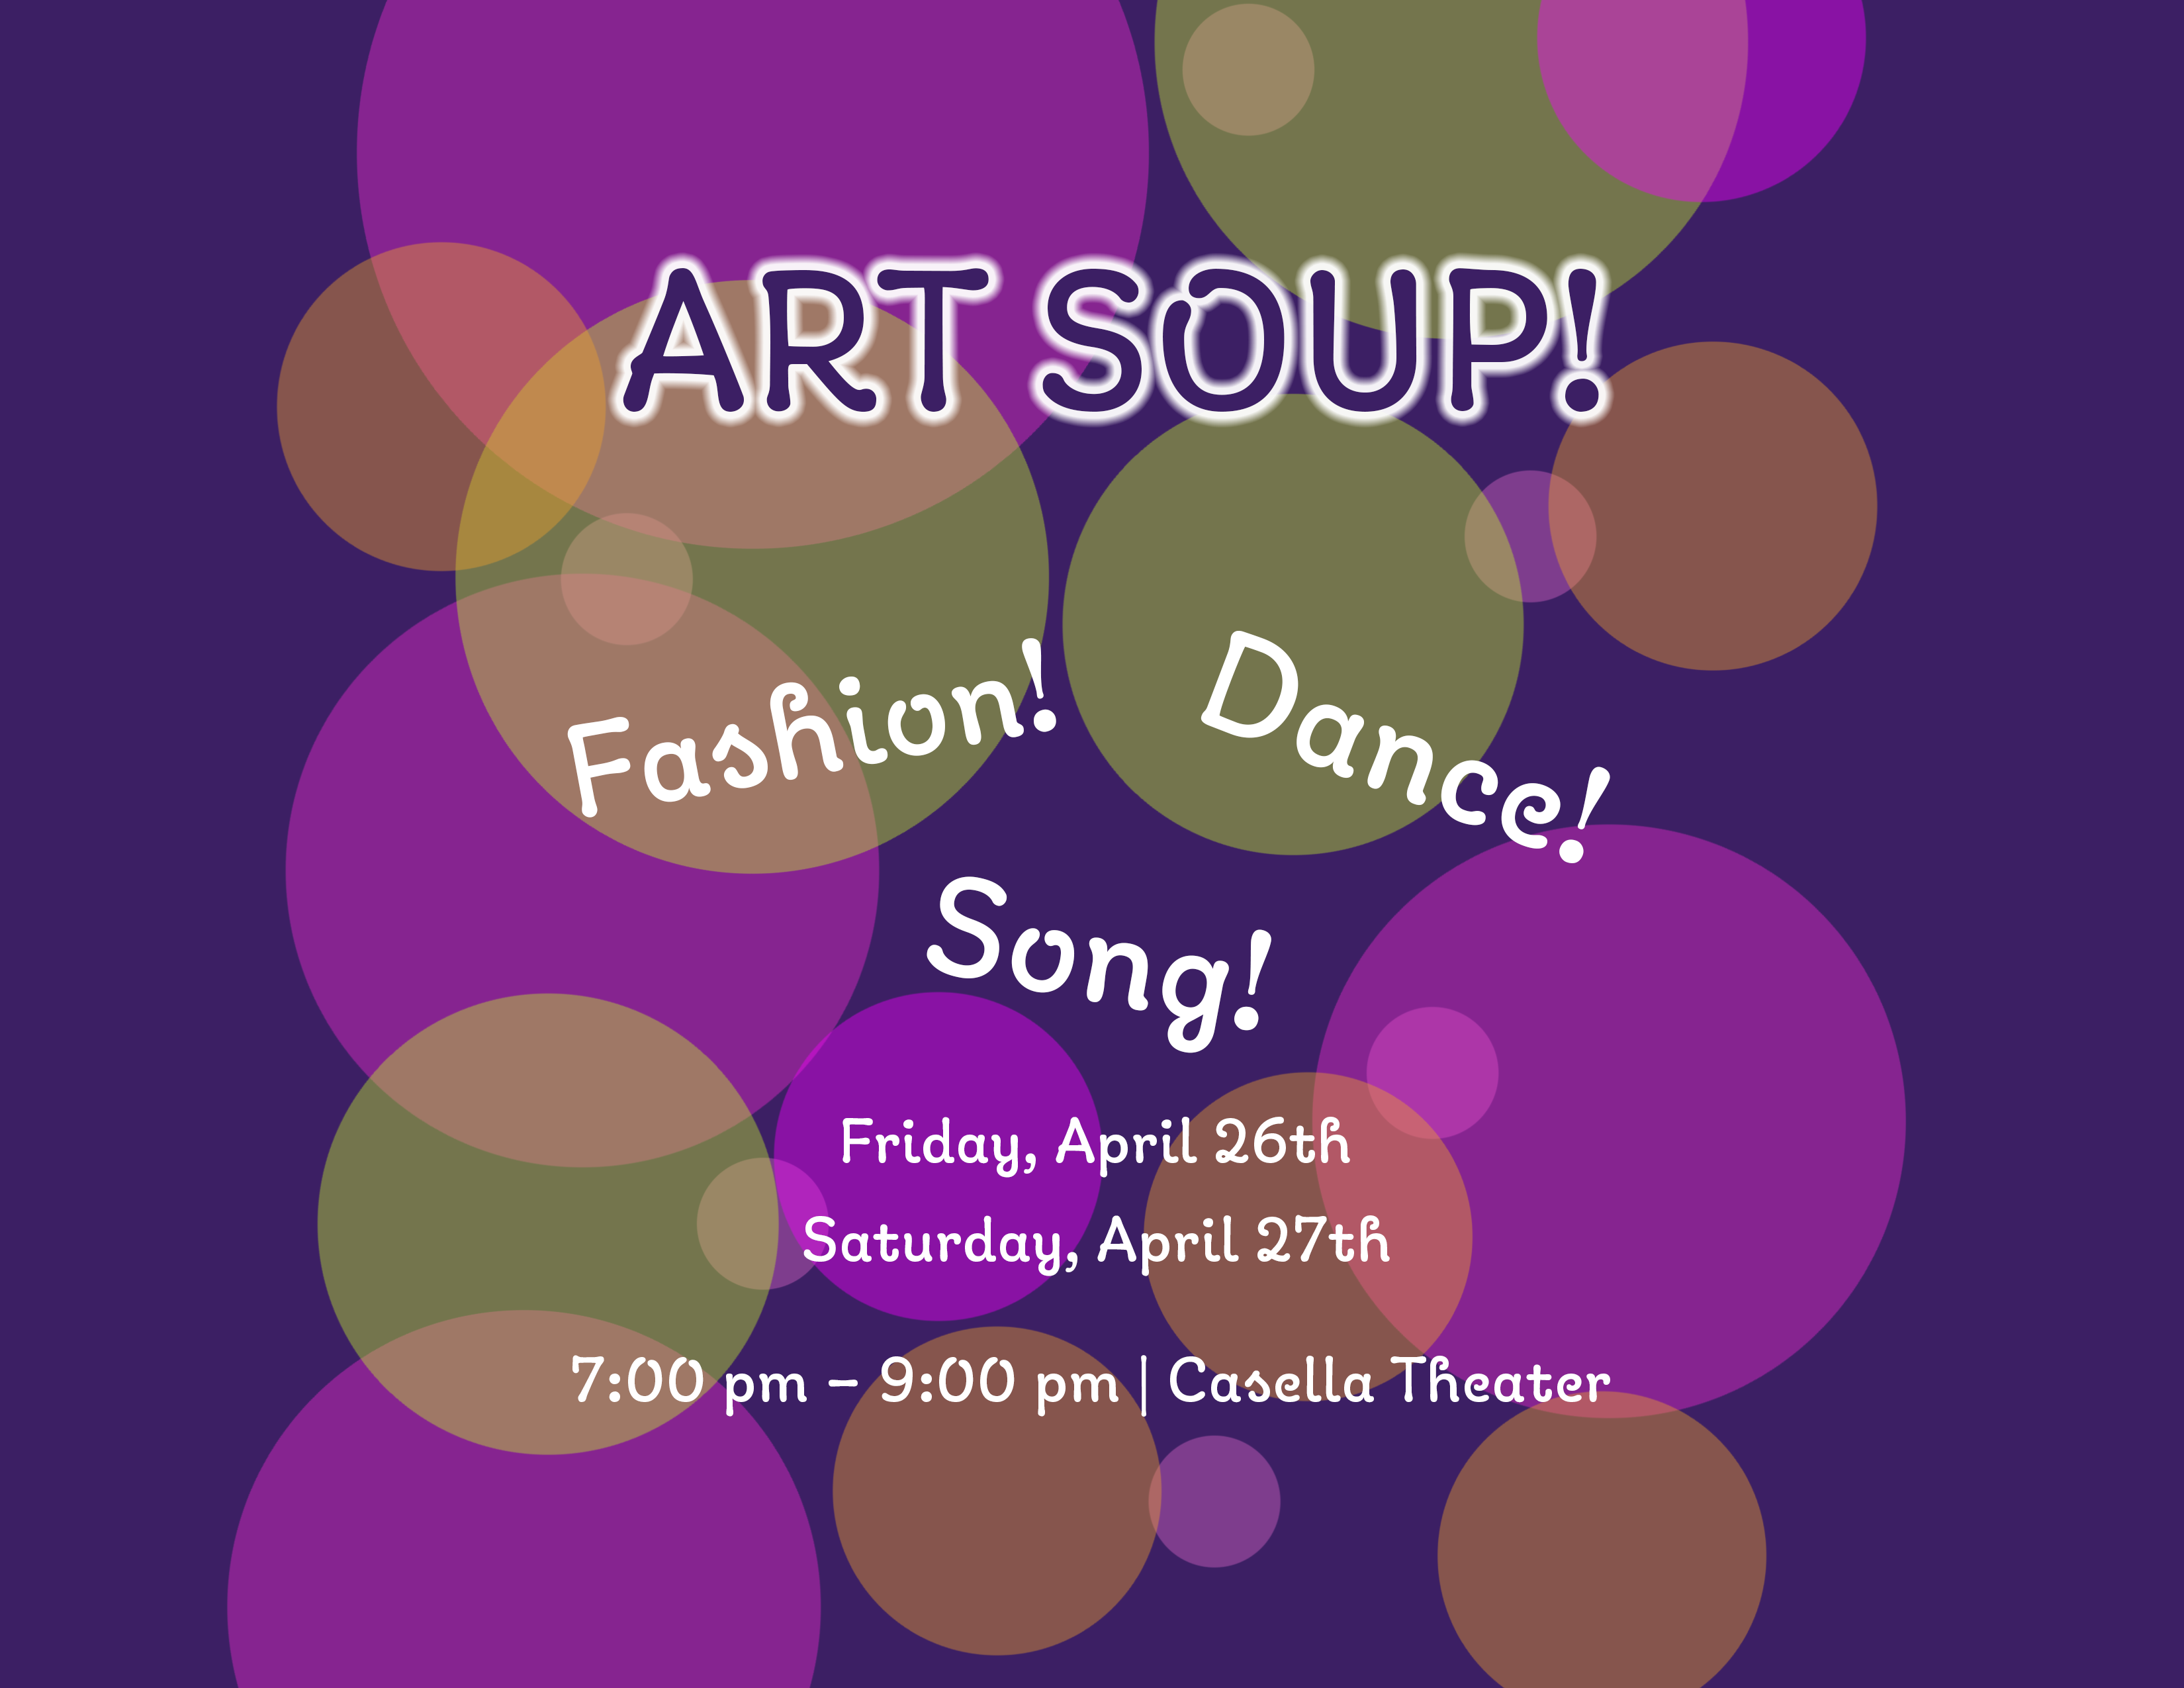 Friday, April 26th

Saturday, April 27th

7:00 pm – 9:00 pm | Casella Theater

Art Soup is a collaborative performance featuring dance, music, and other exciting performance-based art. 

This year, our talented VTSU Castleton students, faculty, and staff will present a performance featuring student choreography accompanied live by the University Chamber Singers led by Dr. Sherrill Blodget, fashion, dance, and song inspired by 2023's pinkest movie, Barbie, dance performances accompanied by live music, and Carnival of the Animals by Camille Saint-Saëns performed live by Castleton's Wind Symphony led by Joshua Thompson in conjunction with choreography by Zoë Marr Hilliard.   

No reservation is required for this event. This event is free for Soundings students. All other tickets are by donation, to benefit VTSU Castleton’s Arts Reach Program. 

Tickets can be reserved through the Casella Box Office. 

Soundings students may only attend one of the four performances of Art Soup for Soundings credit.